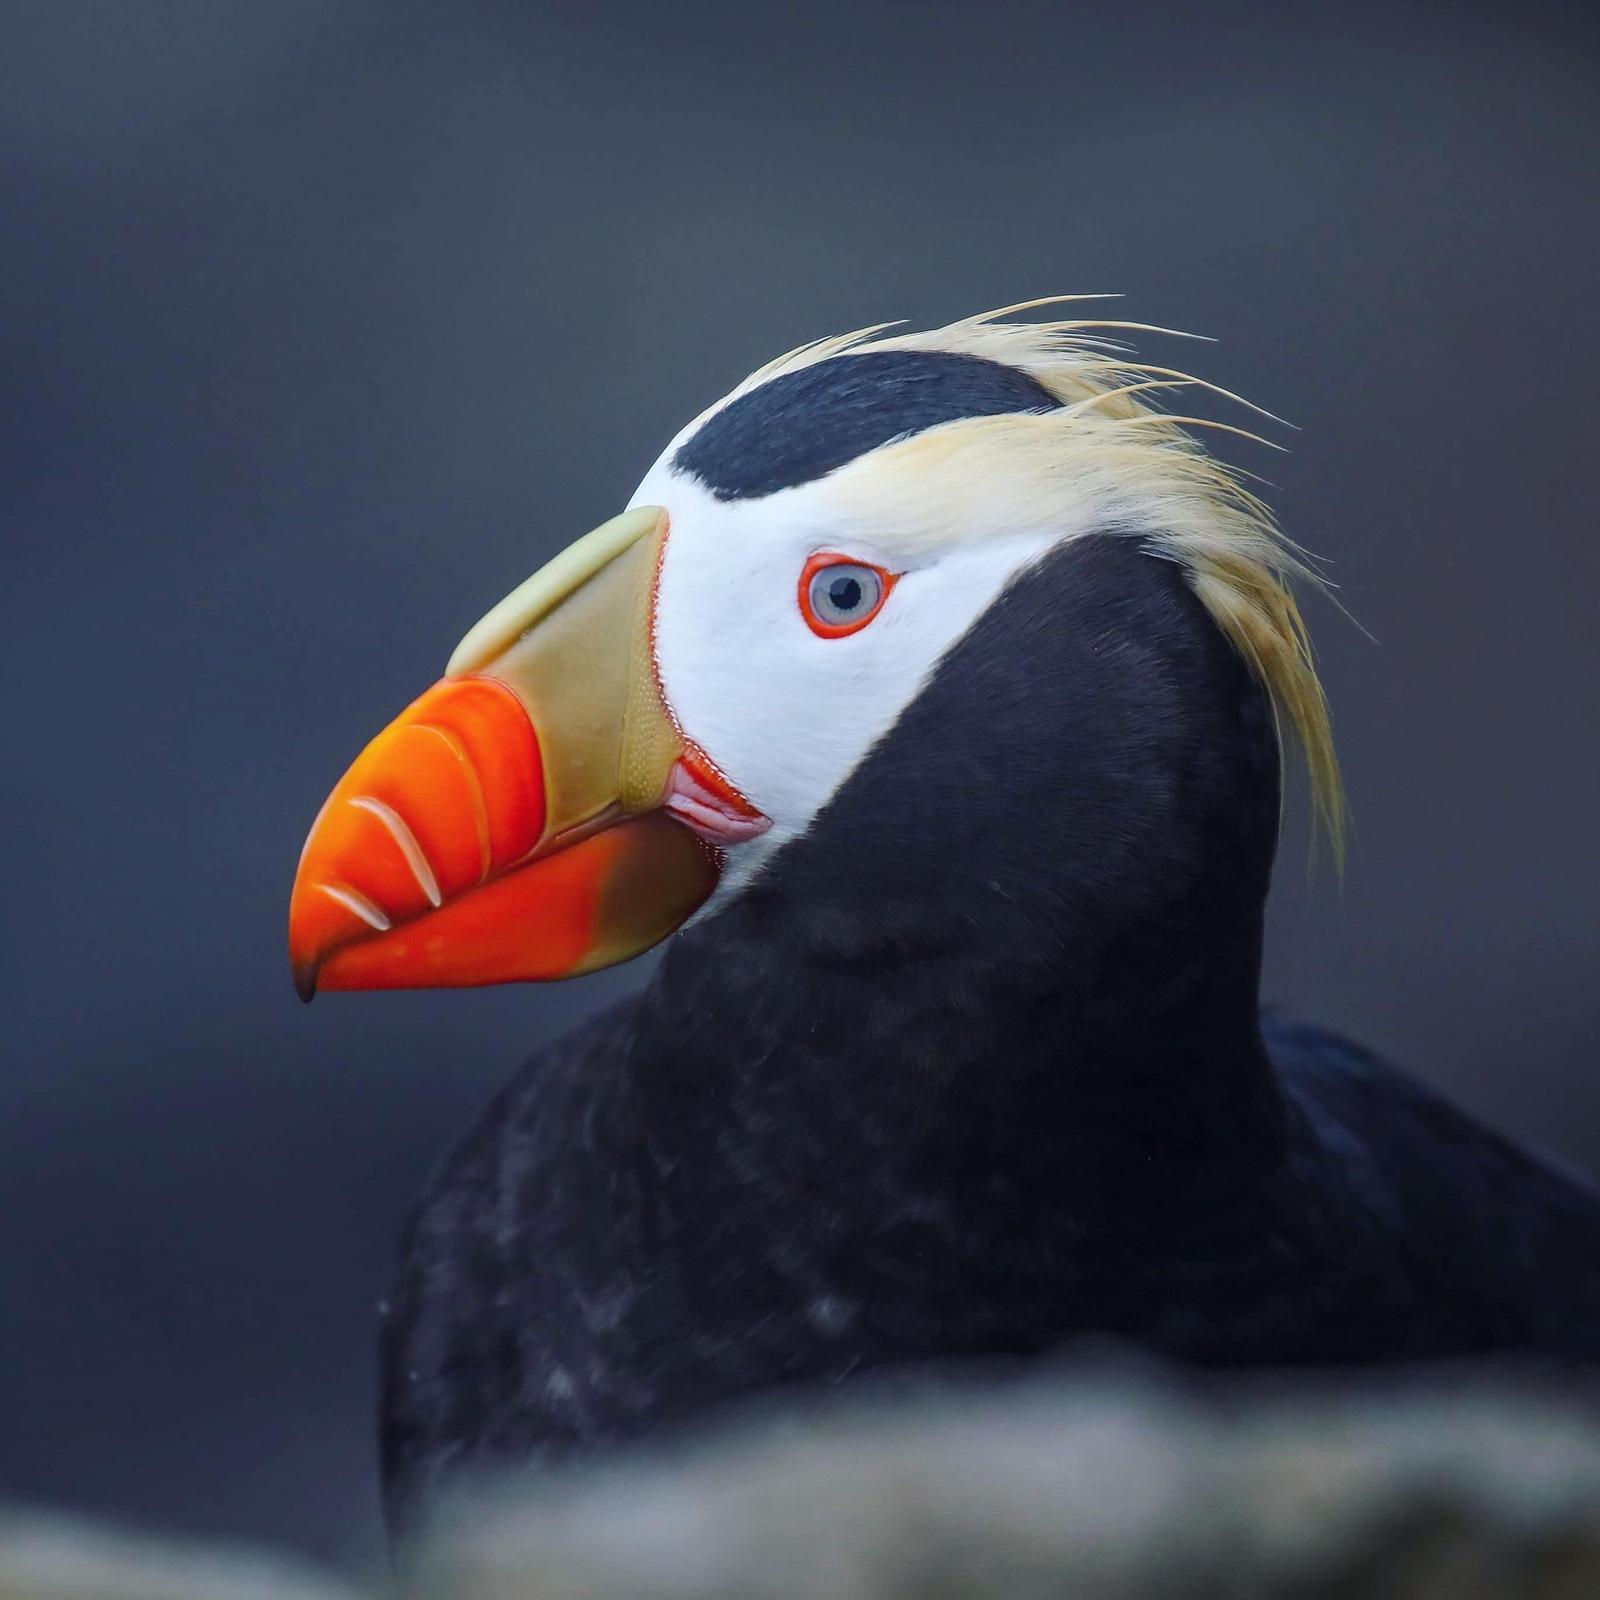 Tufted Puffin Photo by Tom Ford-Hutchinson